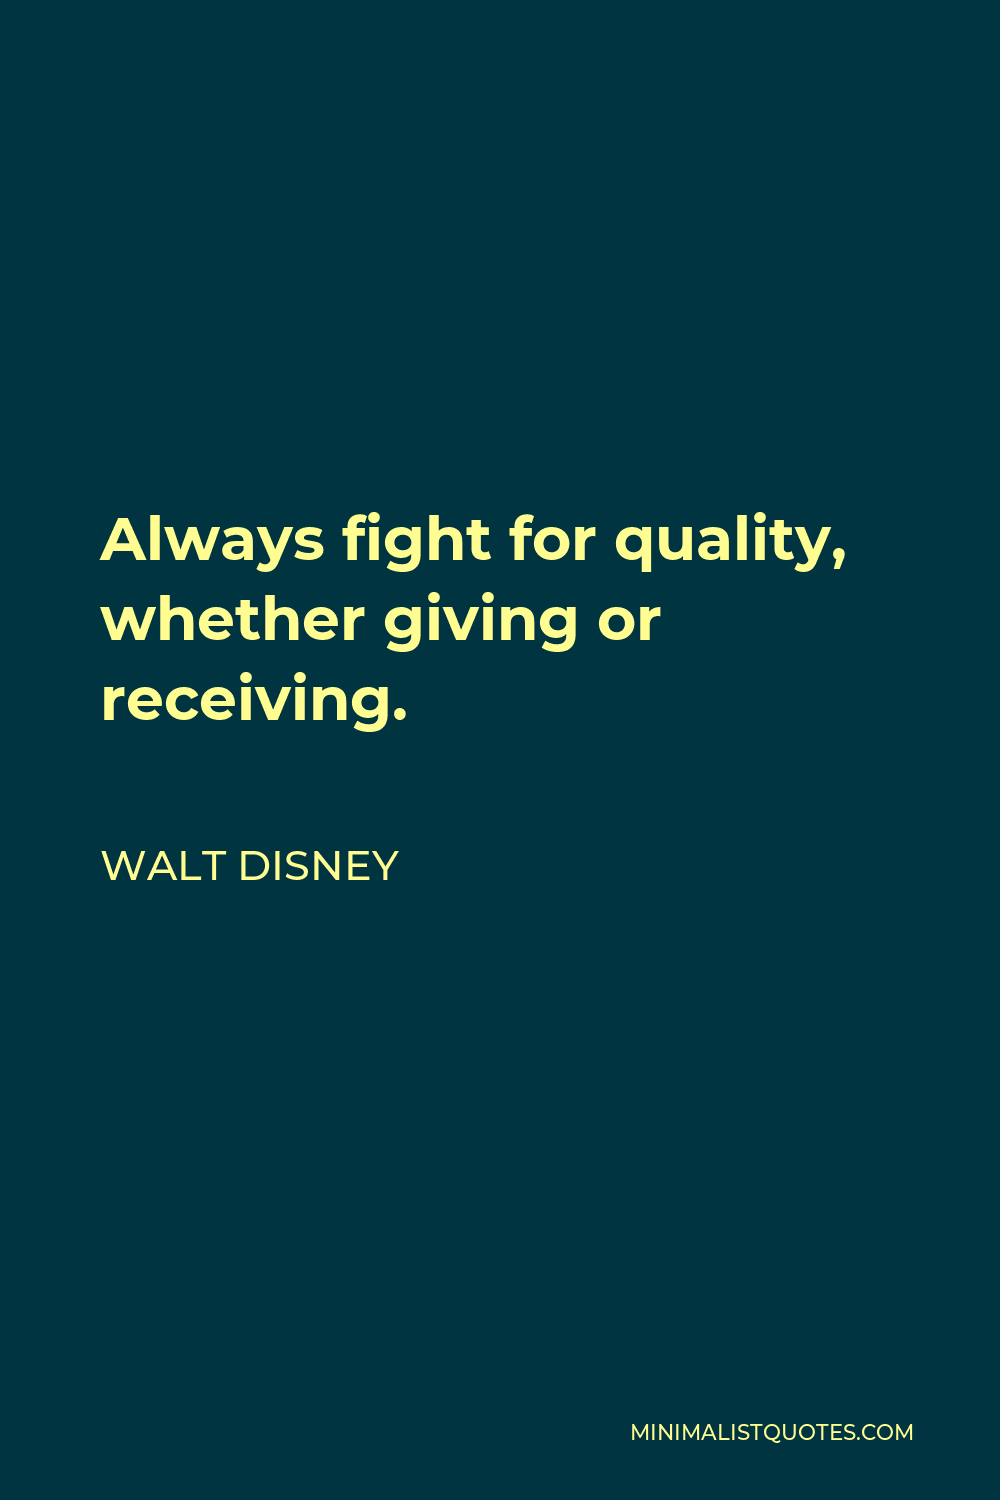 Walt Disney Quote - Always fight for quality, whether giving or receiving.